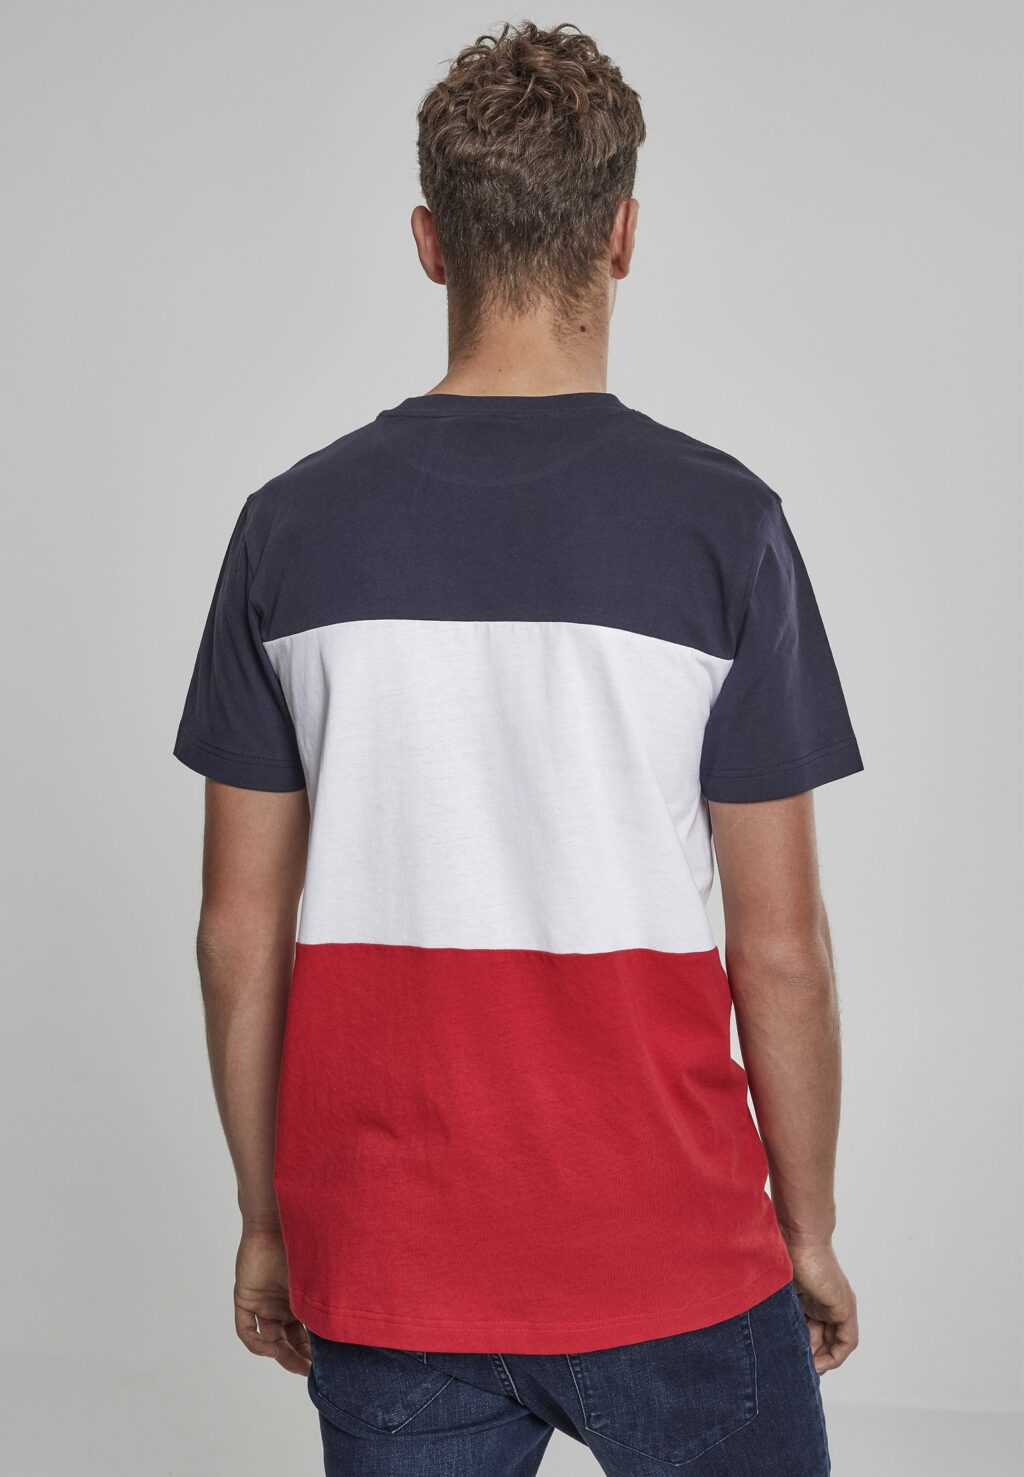 Urban Classics Color Block Tee firered/navy/white TB2058